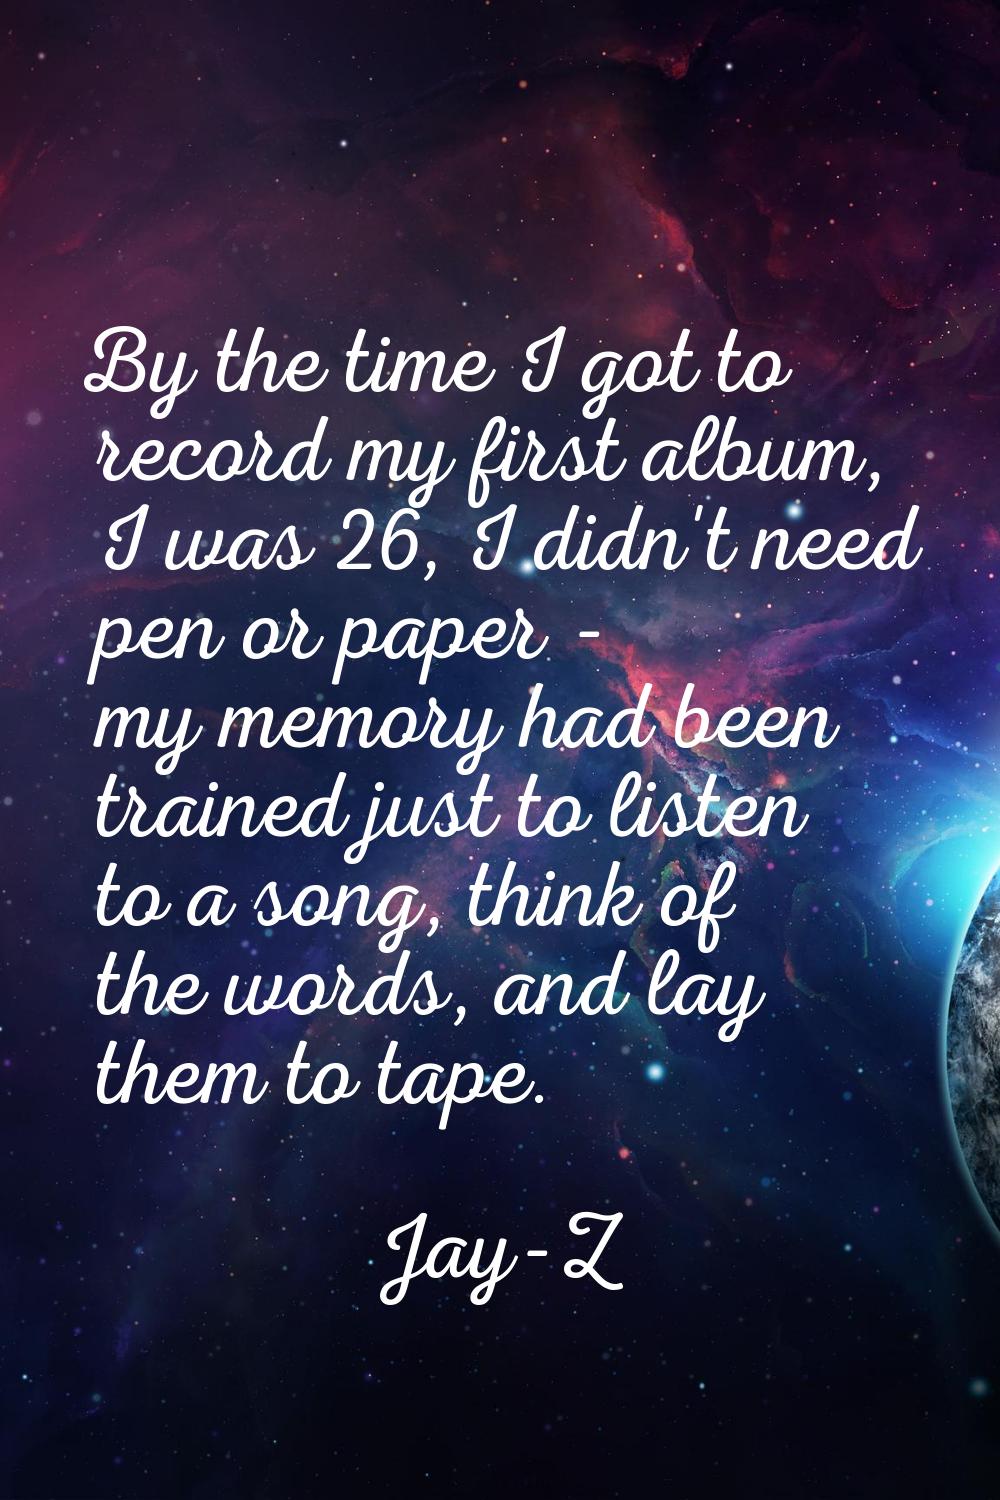 By the time I got to record my first album, I was 26, I didn't need pen or paper - my memory had be